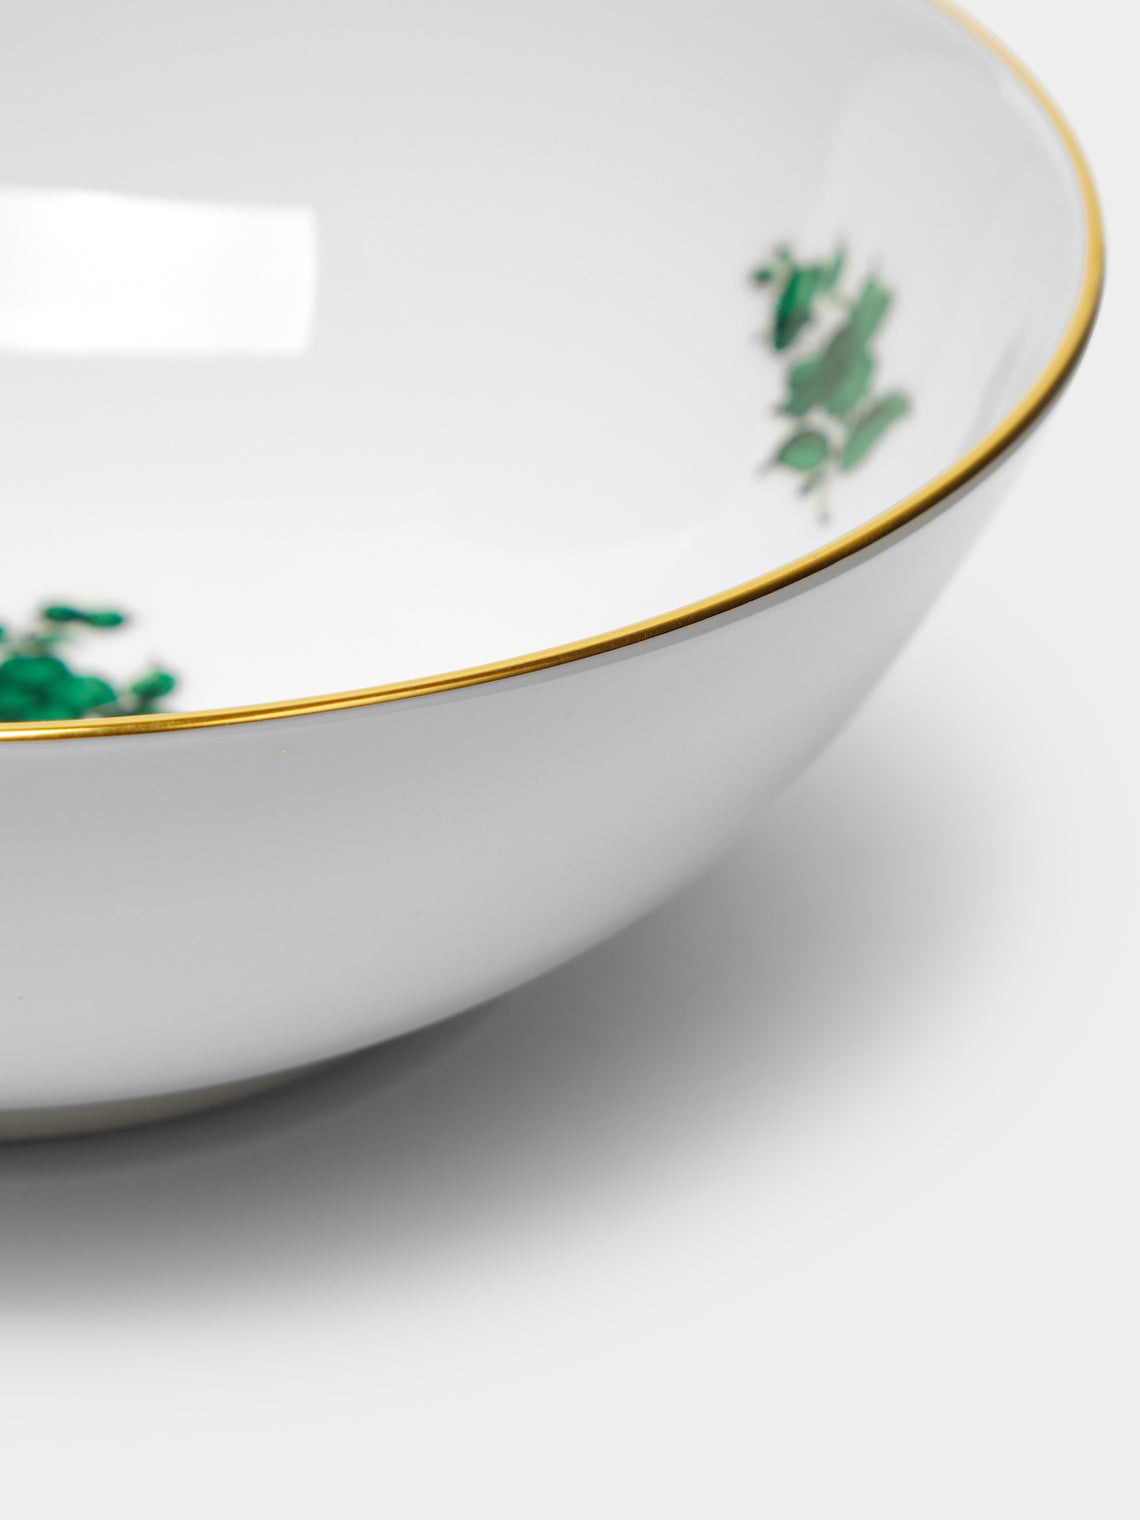 Augarten - Maria Theresia Hand-Painted Porcelain Bowl -  - ABASK